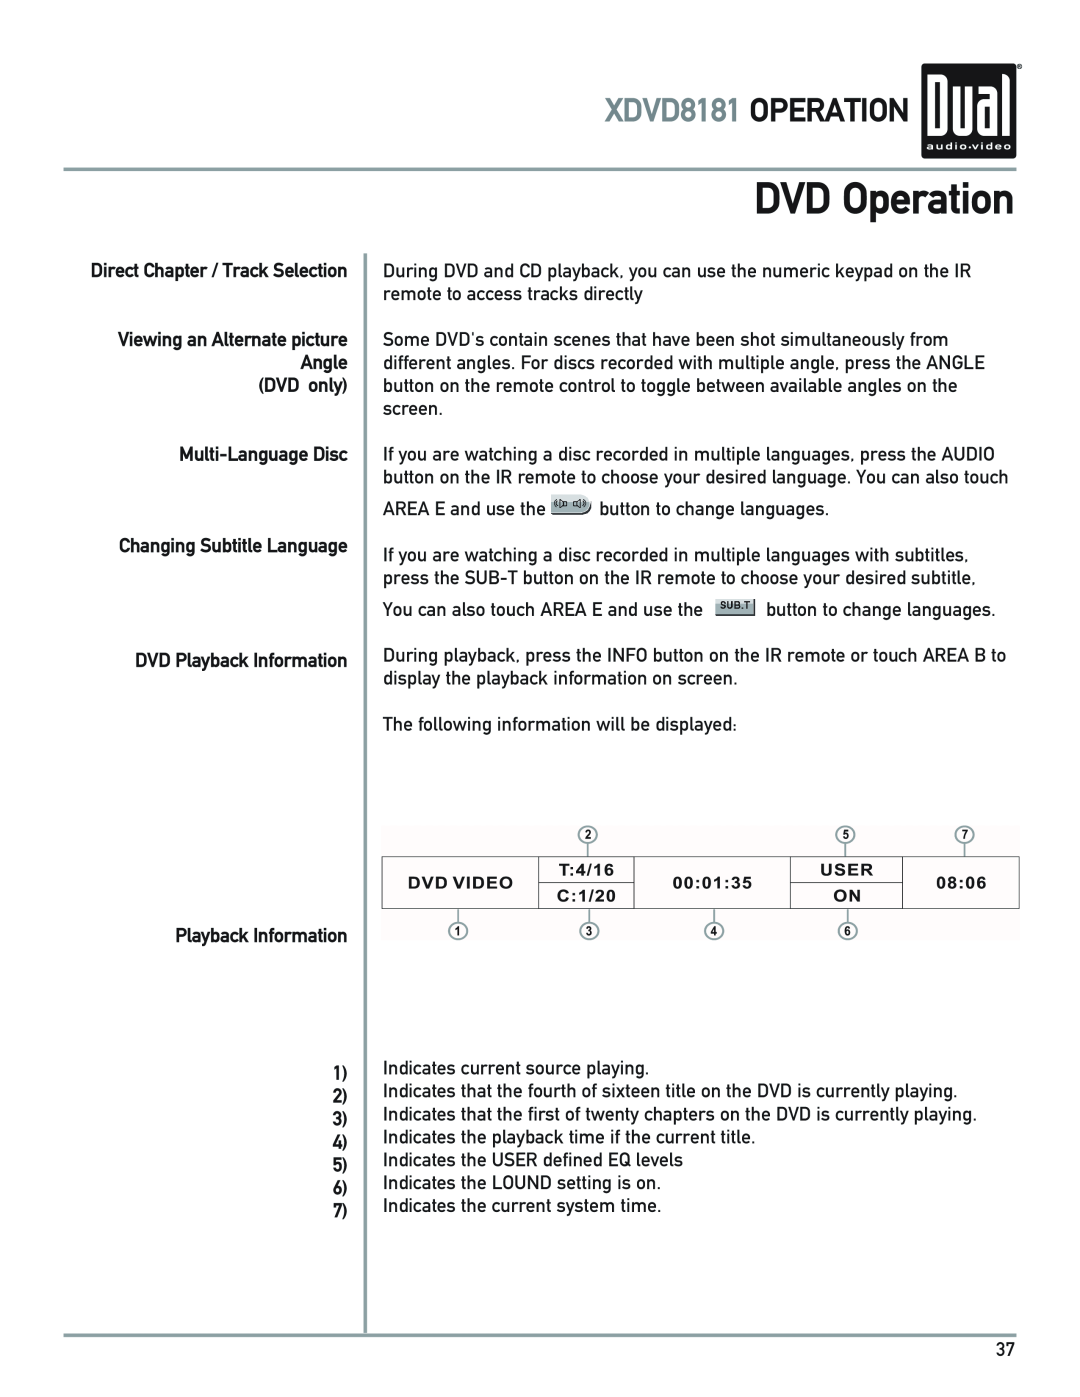 Dual owner manual DVD Operation, XDVD8181 OPERATION, Viewing an Alternate picture Angle DVD only 